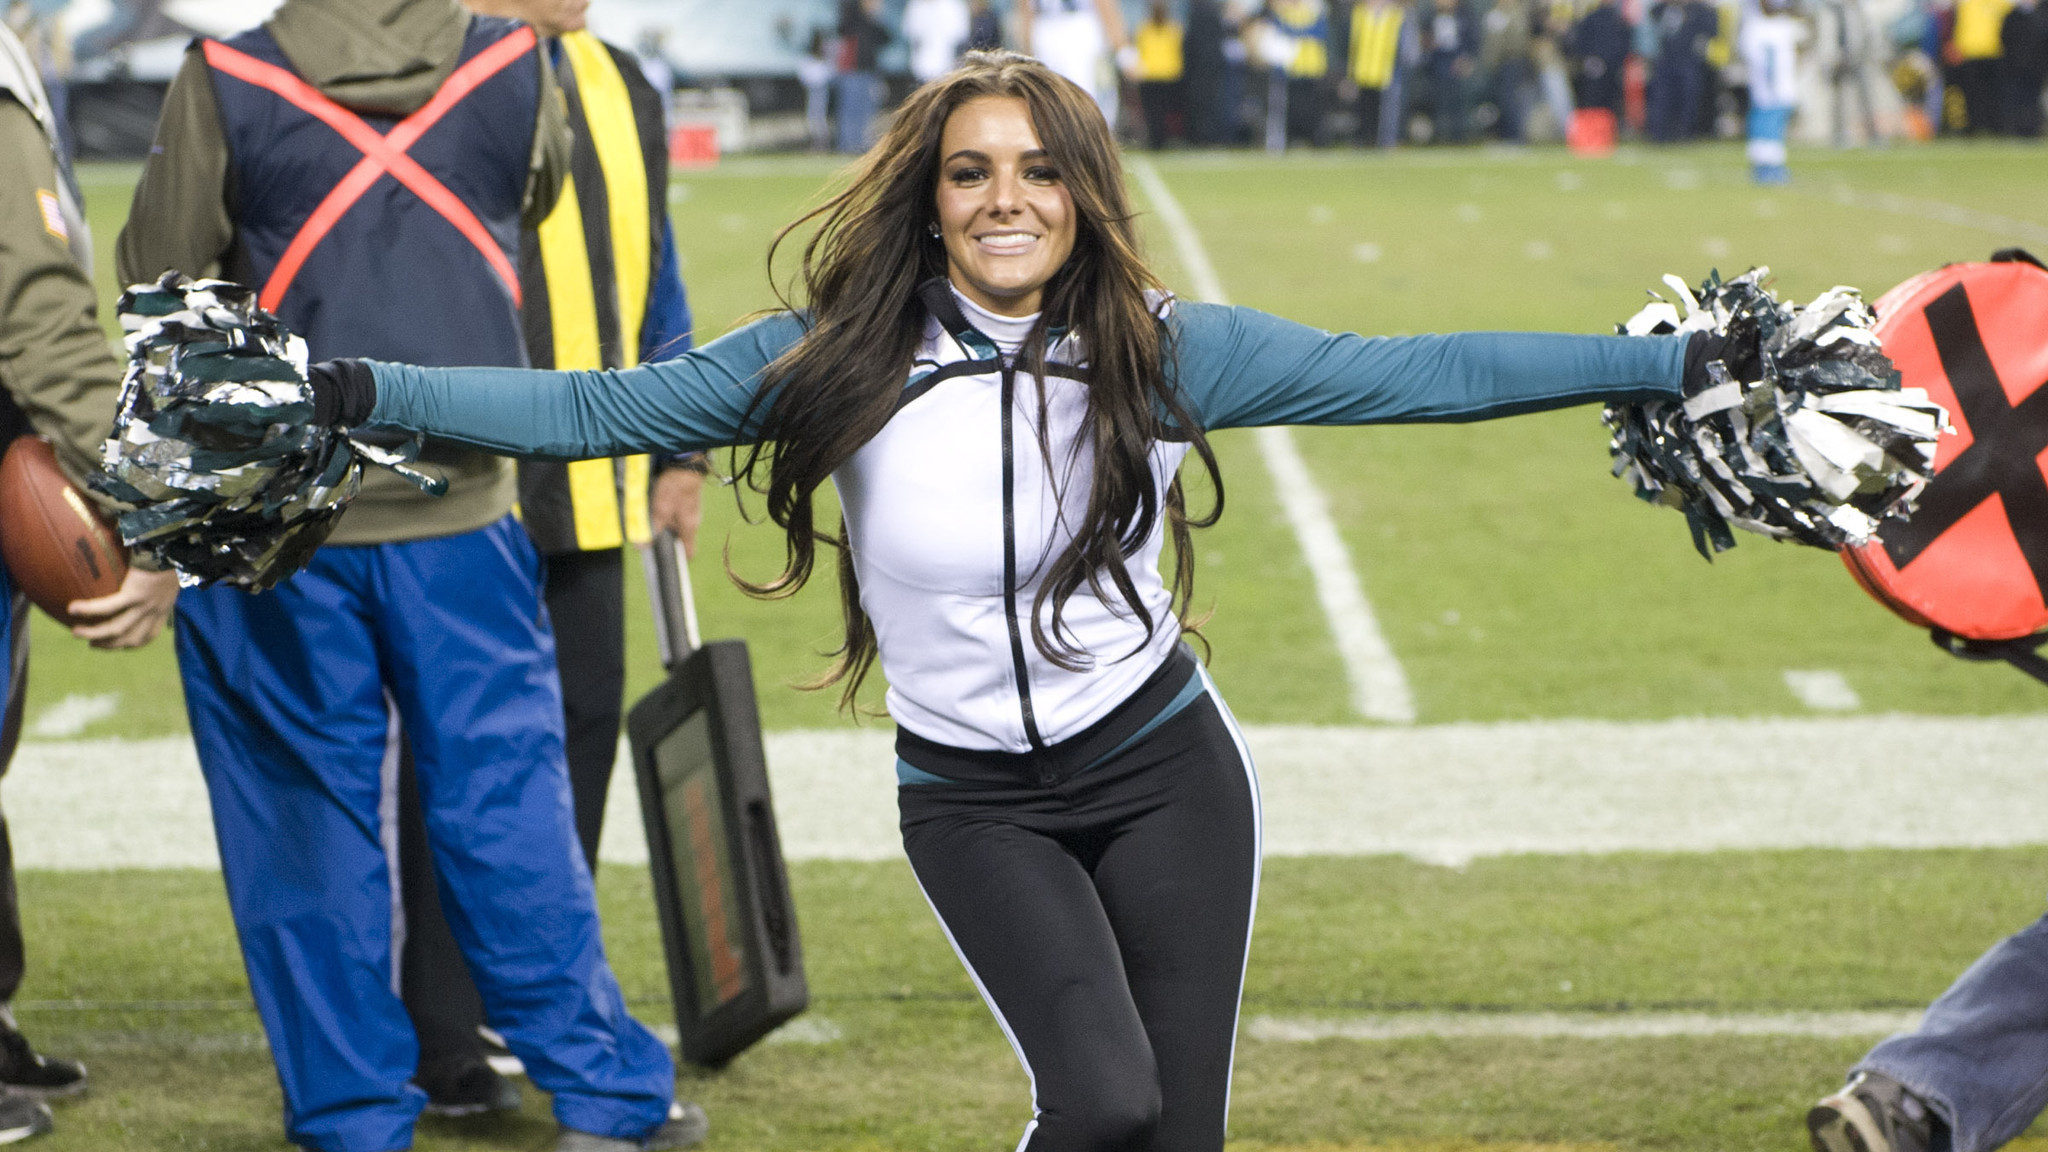 Philadelphia Eagles Fans And Cheerleader Photos At